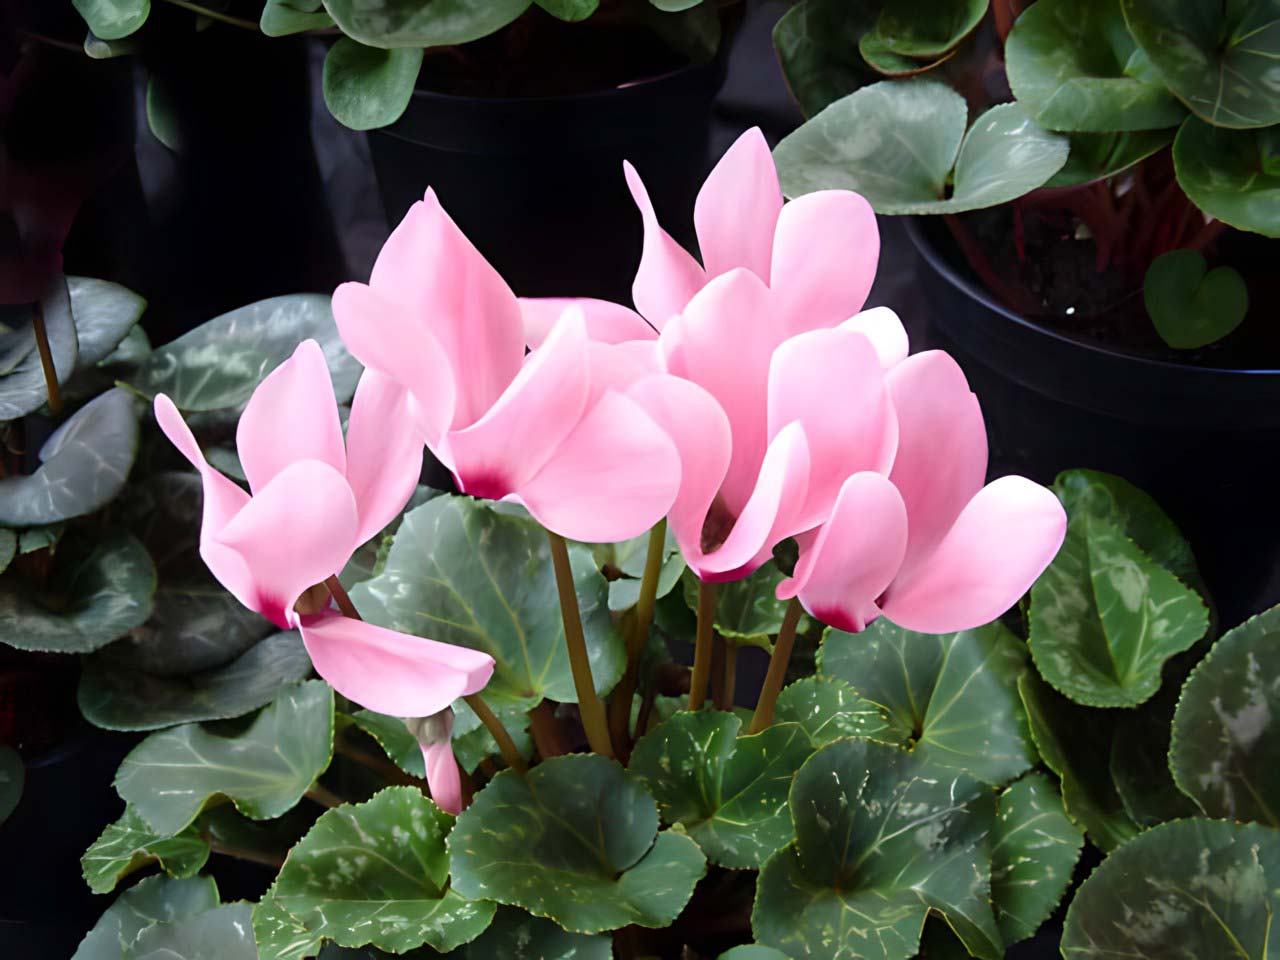 Cyclamen persicum - this is a hybrid called Mini